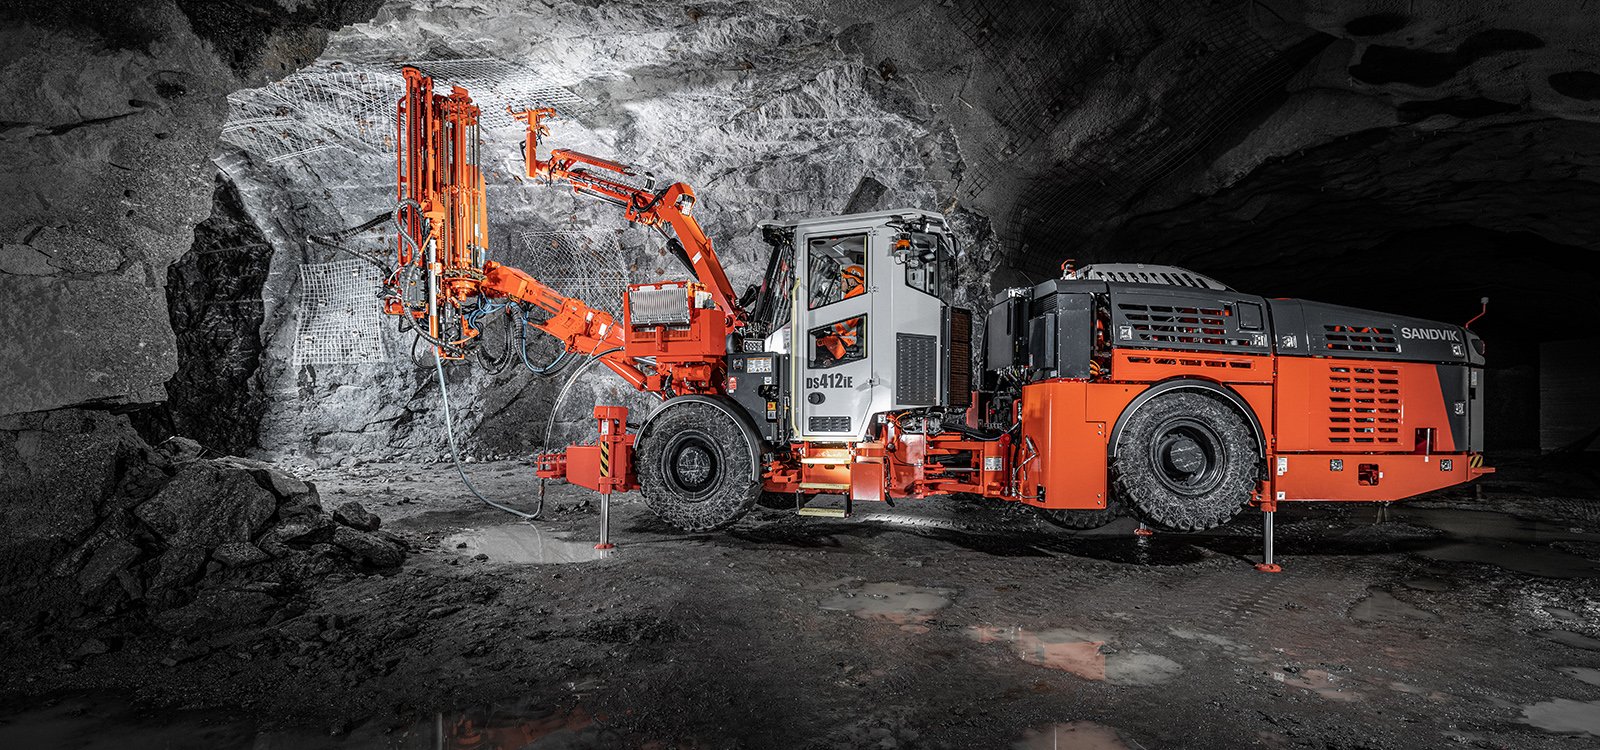 With upgraded drill control and many other improvements, Sandvik DS412iE supplies customers with more productive rock reinforcement drilling along with